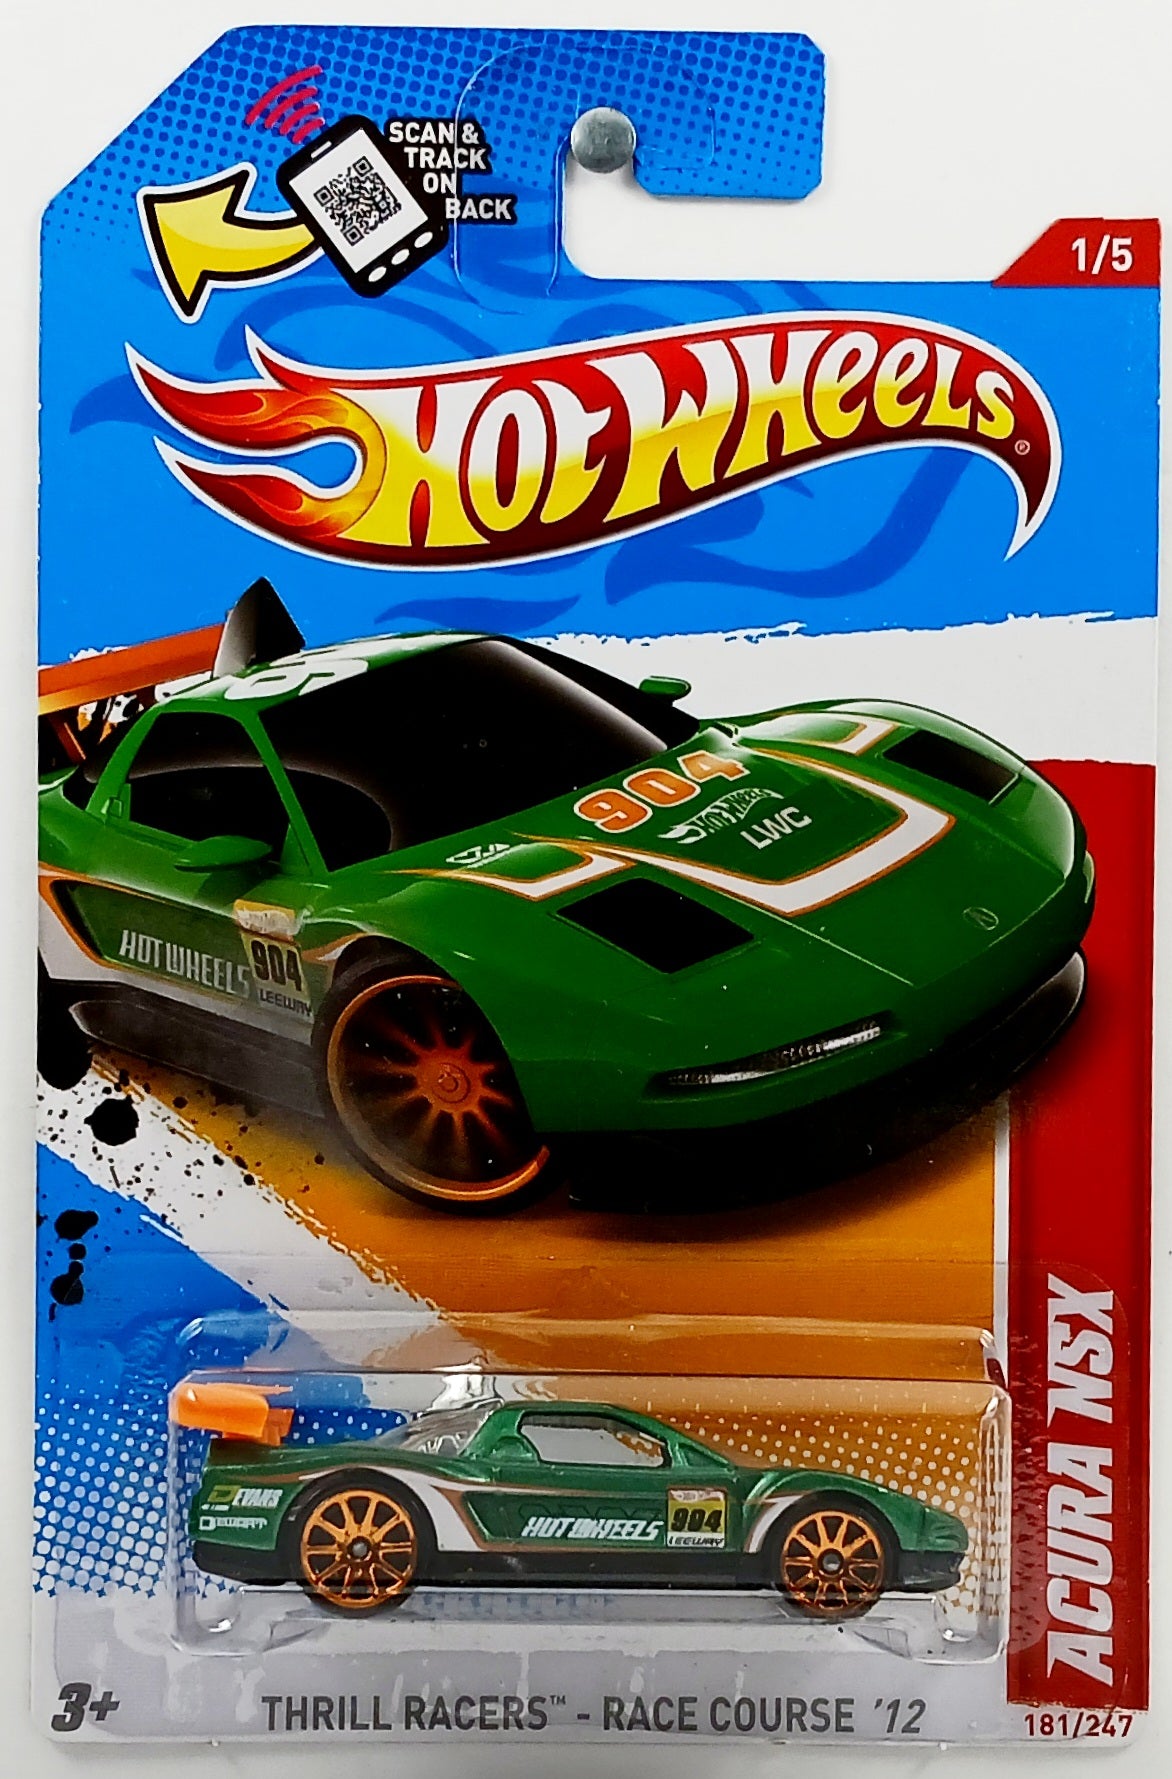 Hot Wheels 2012 - Collector # 181/247 - Thrill Racers / Race Course 1/5 - Acura NSX - Green - USA